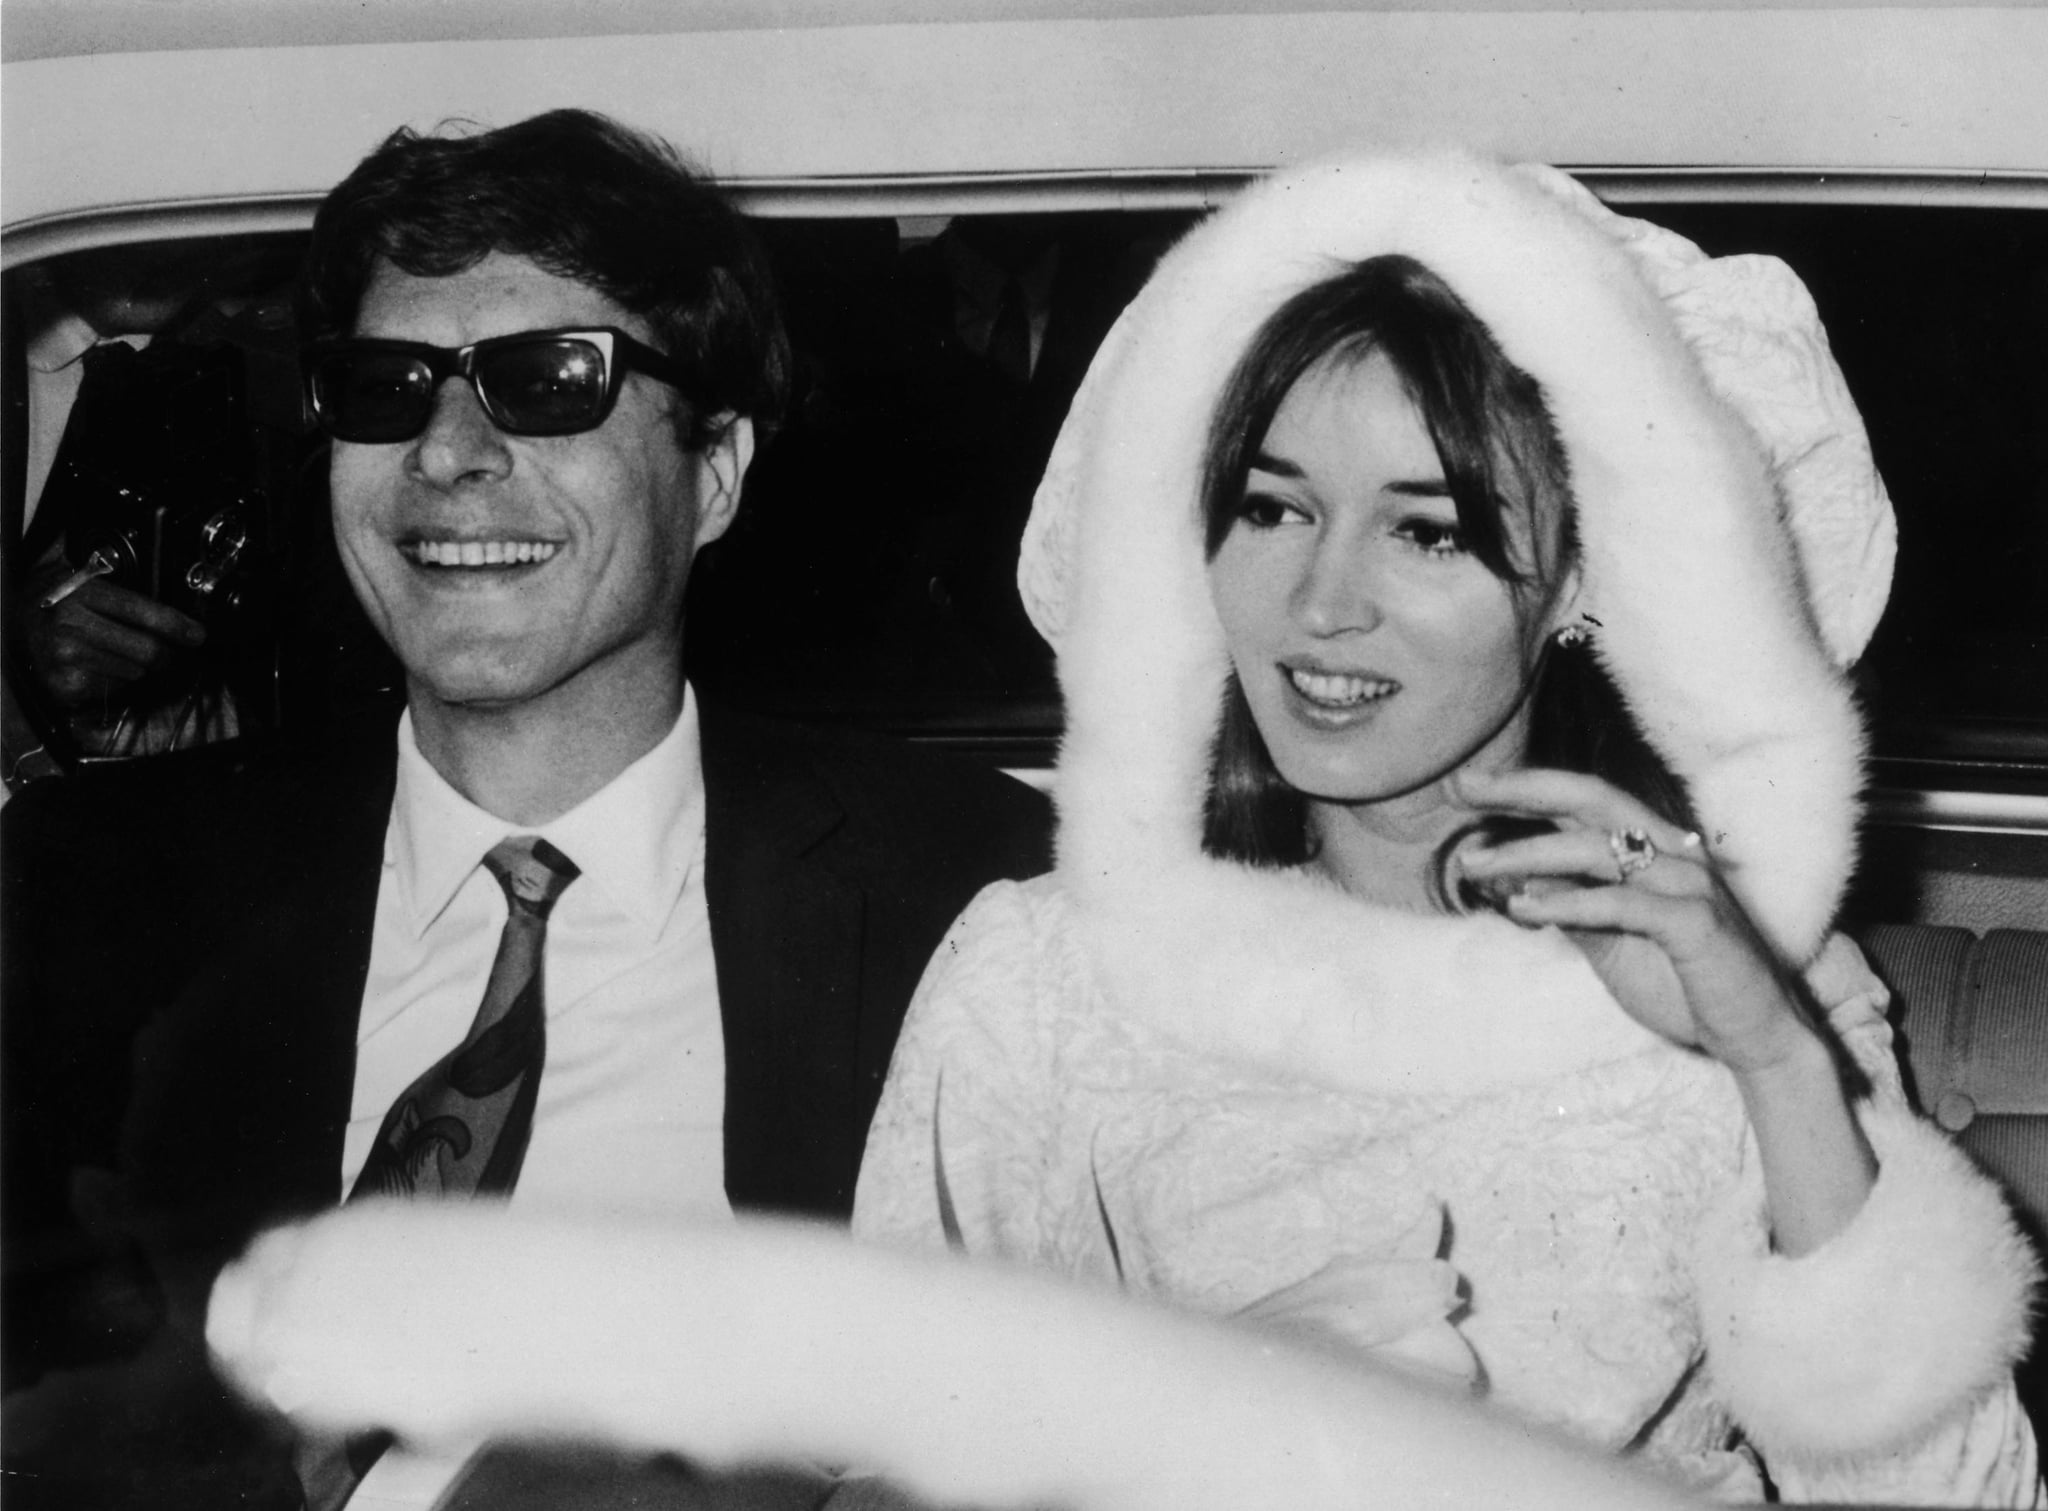 ROME - DECEMBER 10, 1966: (FILE PHOTO) John Paul Getty Jr., the son of petroleum multimillionaire John Paul Getty and his second wife Talitha Pol (1940-1971) are shown on December 10, 1966 after their wedding at the Capitol Hall in Rome. The American-born philanthropist and billionaire became a British citizen late in his life and was given full honors as the Knight Commander of the Most Excellent Order of the British Empire in 1998. (Photo by Getty Images)